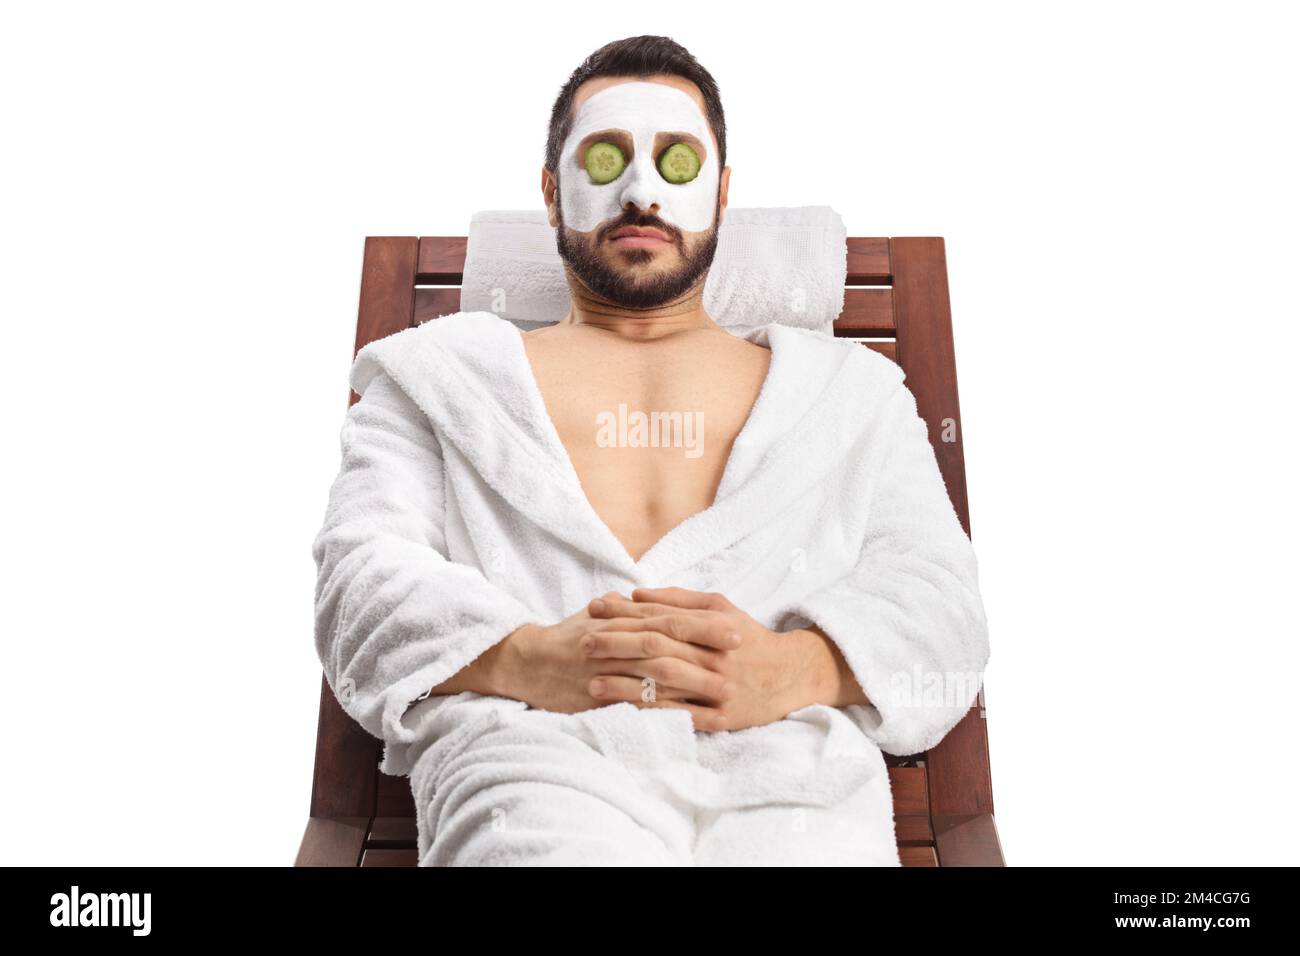 Man with a face mask and cucumber over eyes relaxing on a lounge chair isolated on white background Stock Photo